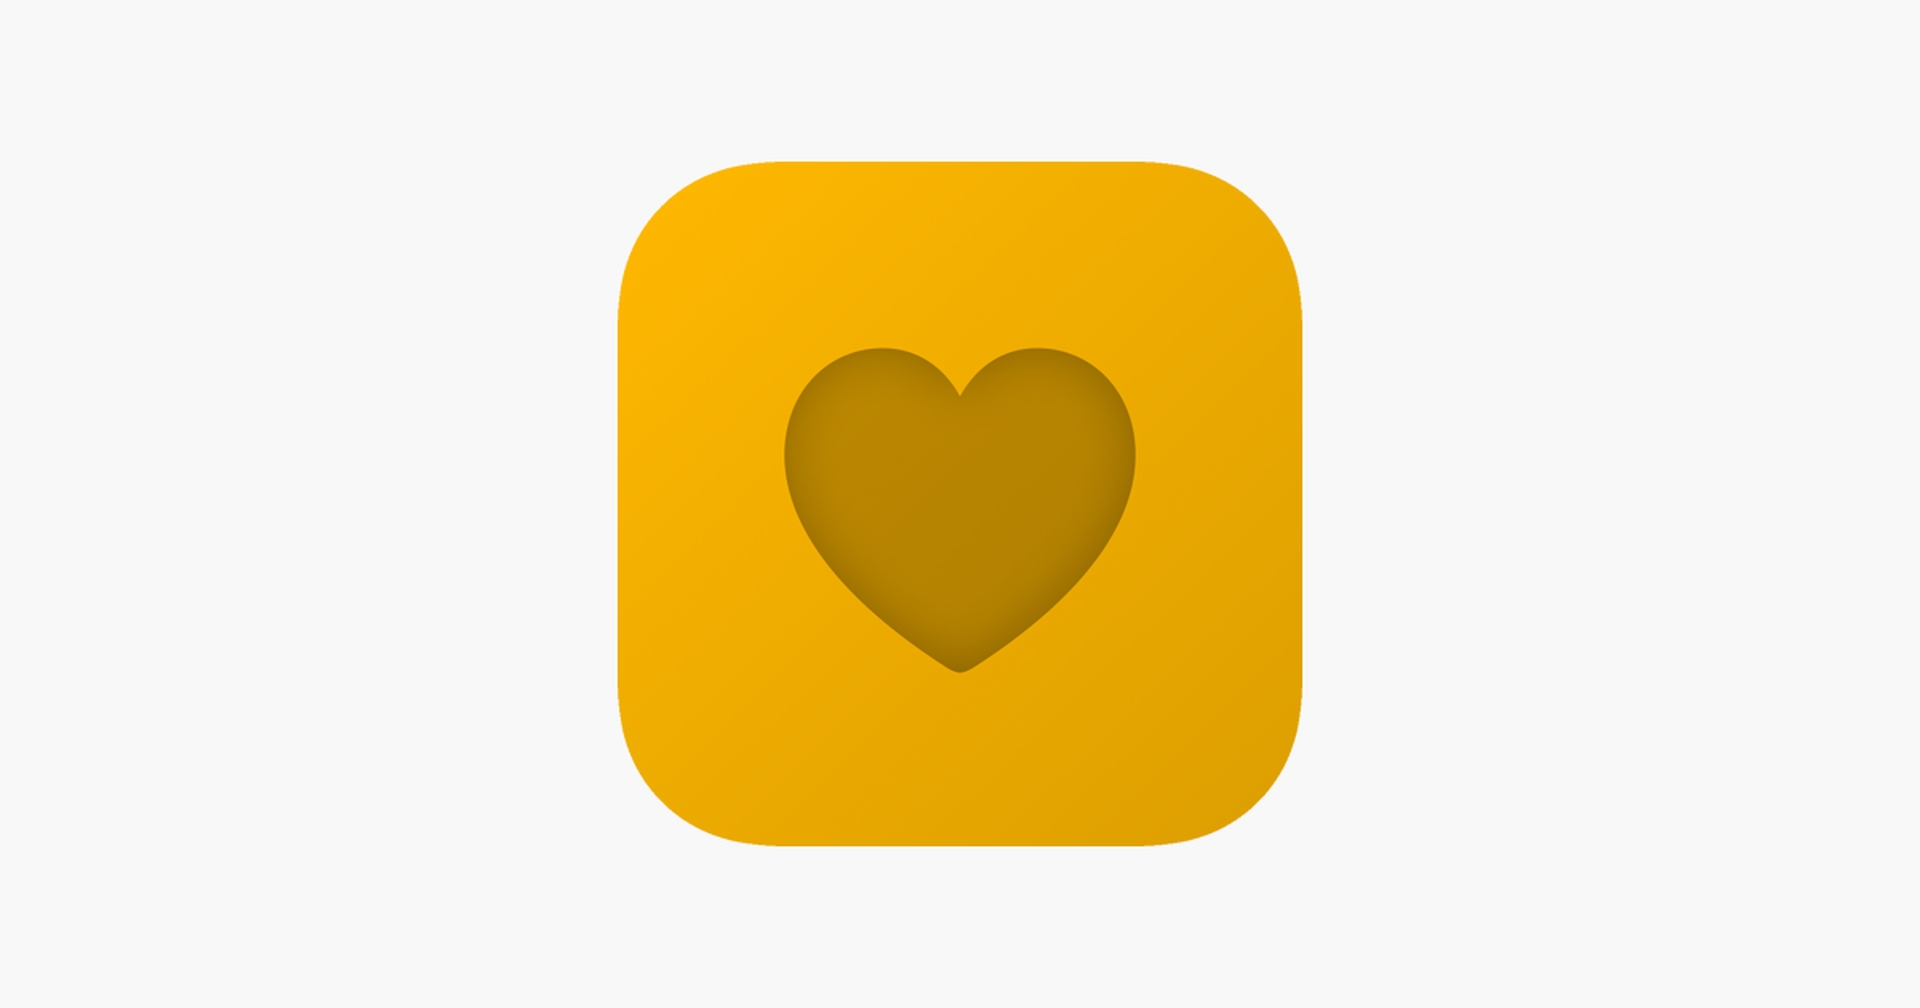 It isn't every day that a new social media app pops up and creates a buzz, but Locket widget app did just that, and it is still gaining more traction.